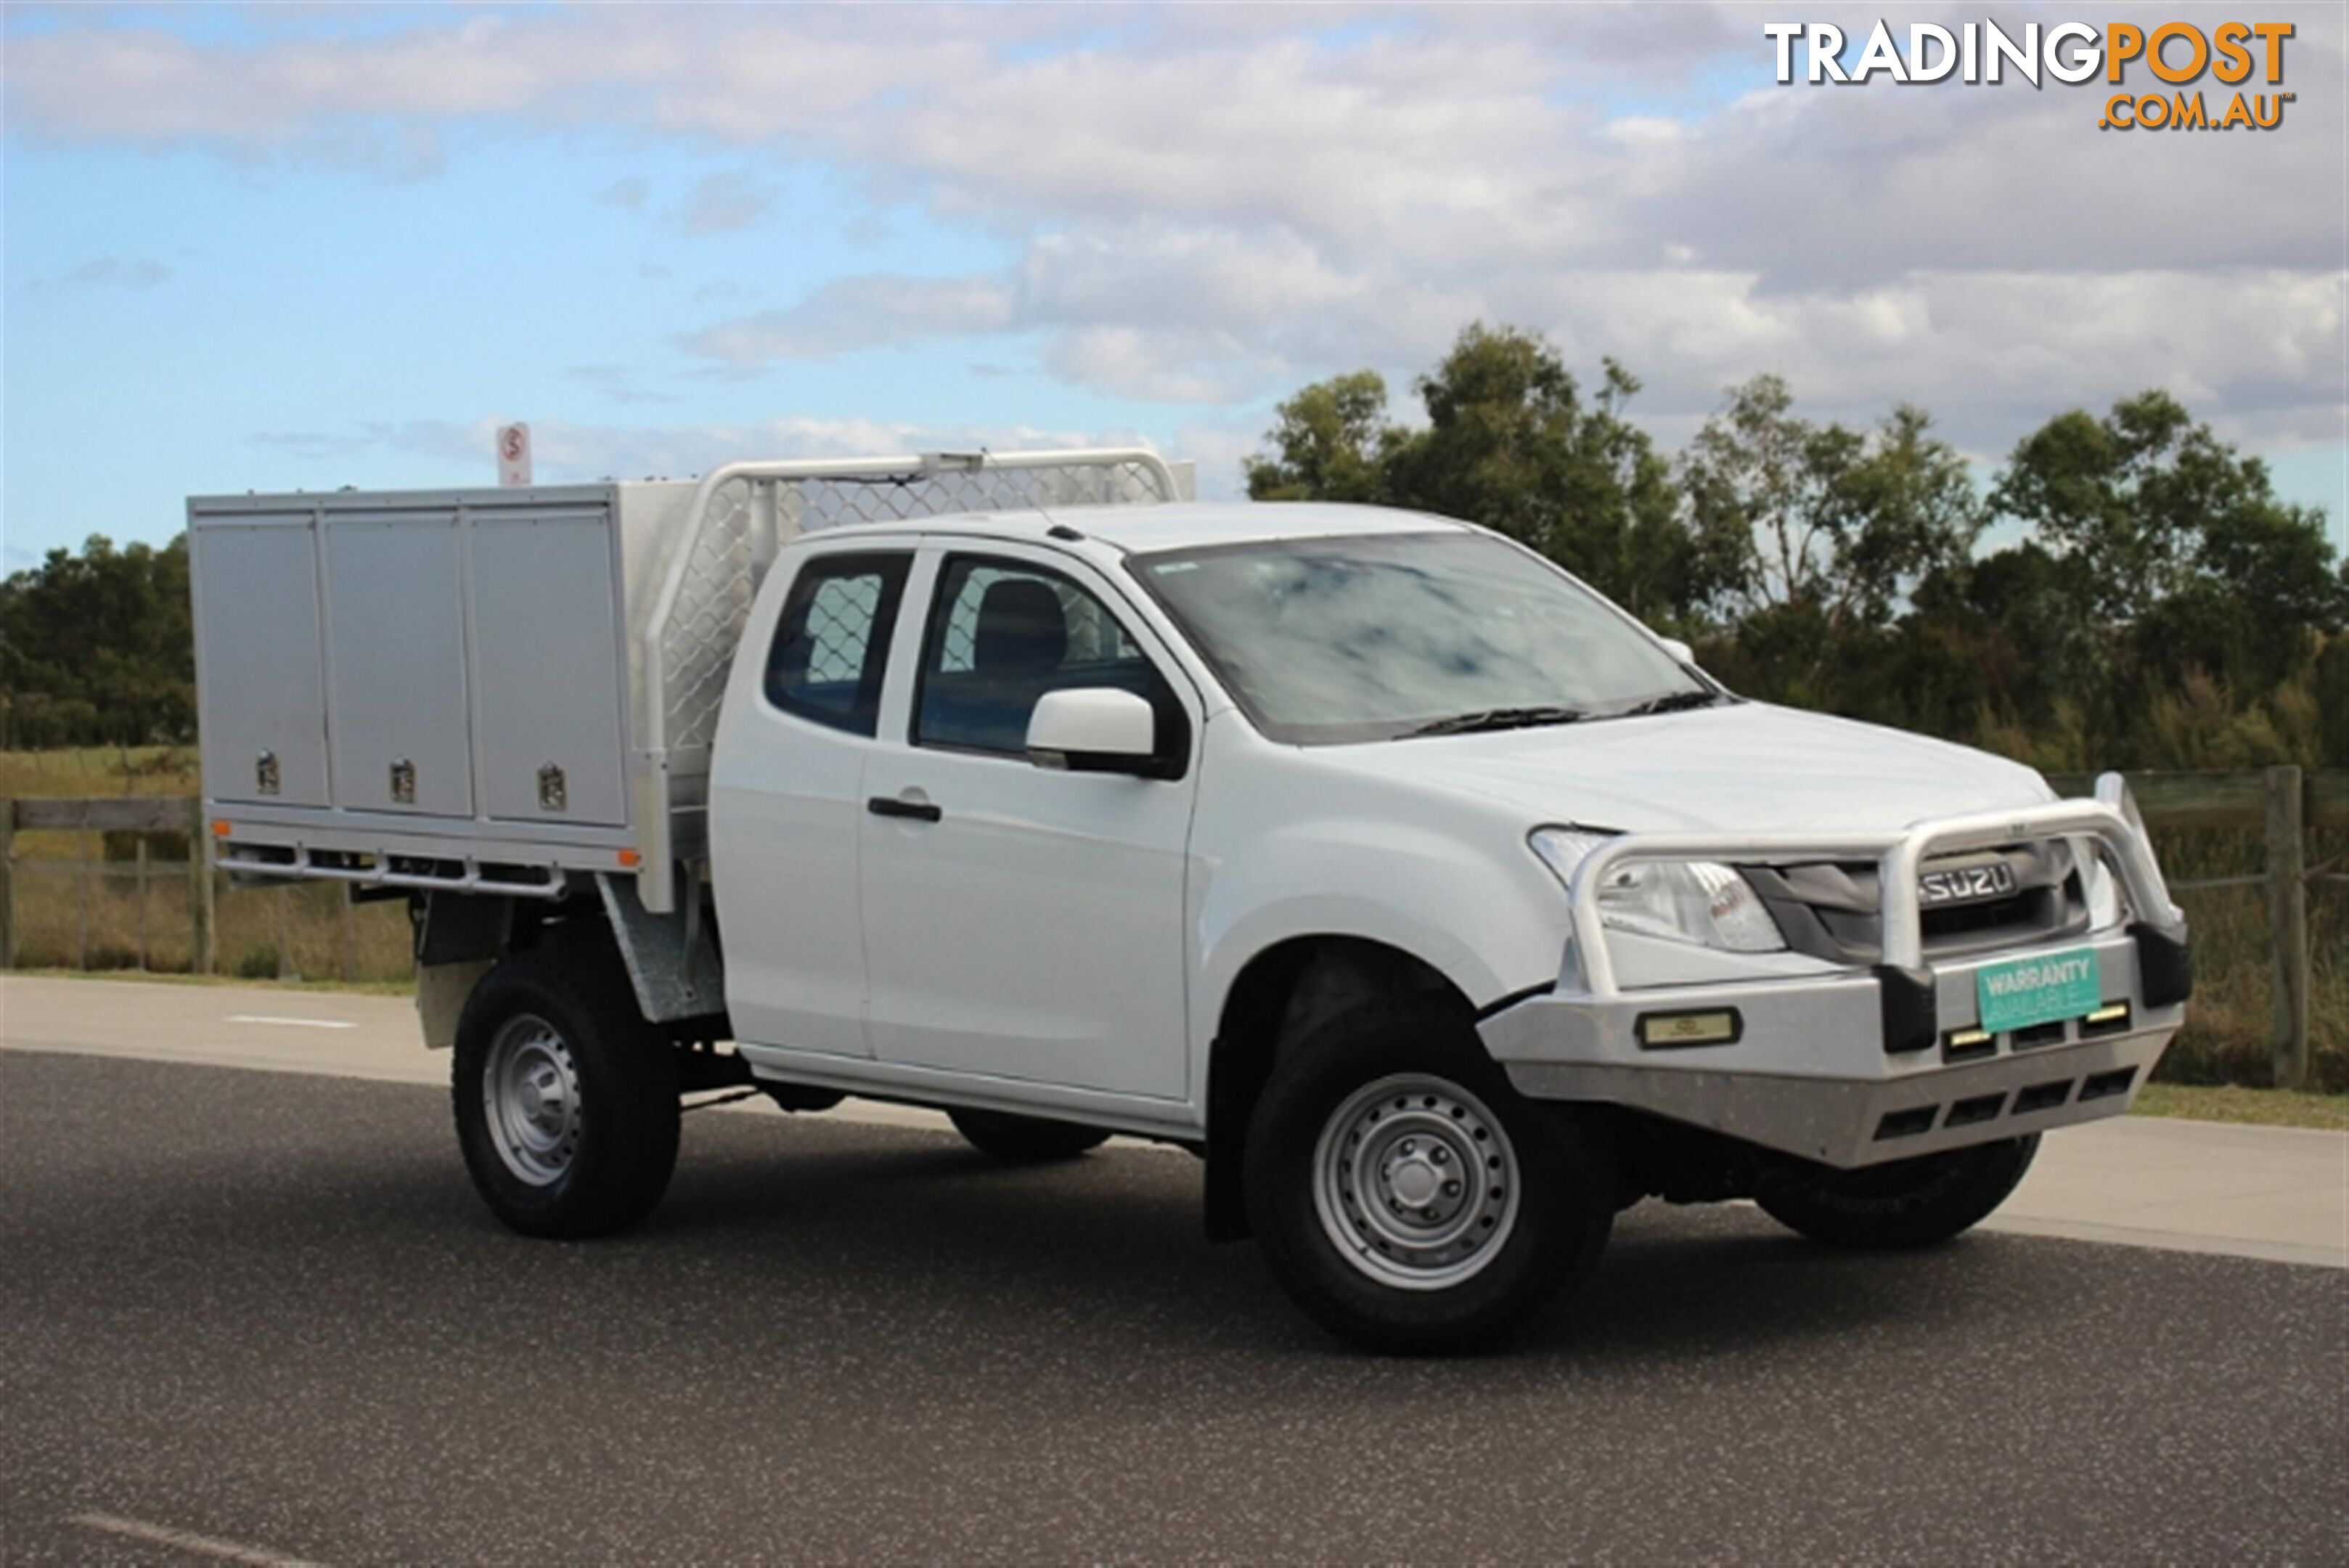 2013 ISUZU D-MAX SX EXTENDED CAB MY12 CAB CHASSIS